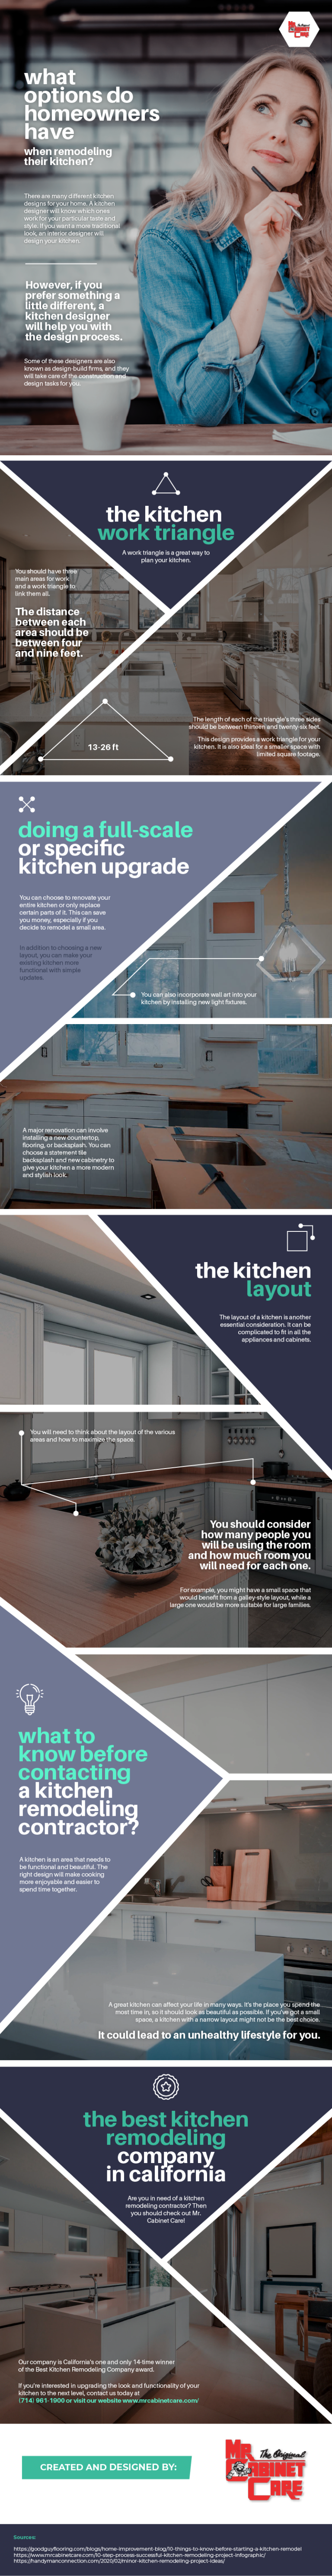 What_Options_Do_Homeowners_Have_When_Remodeling_Their_Kitchen_infographic_image_55